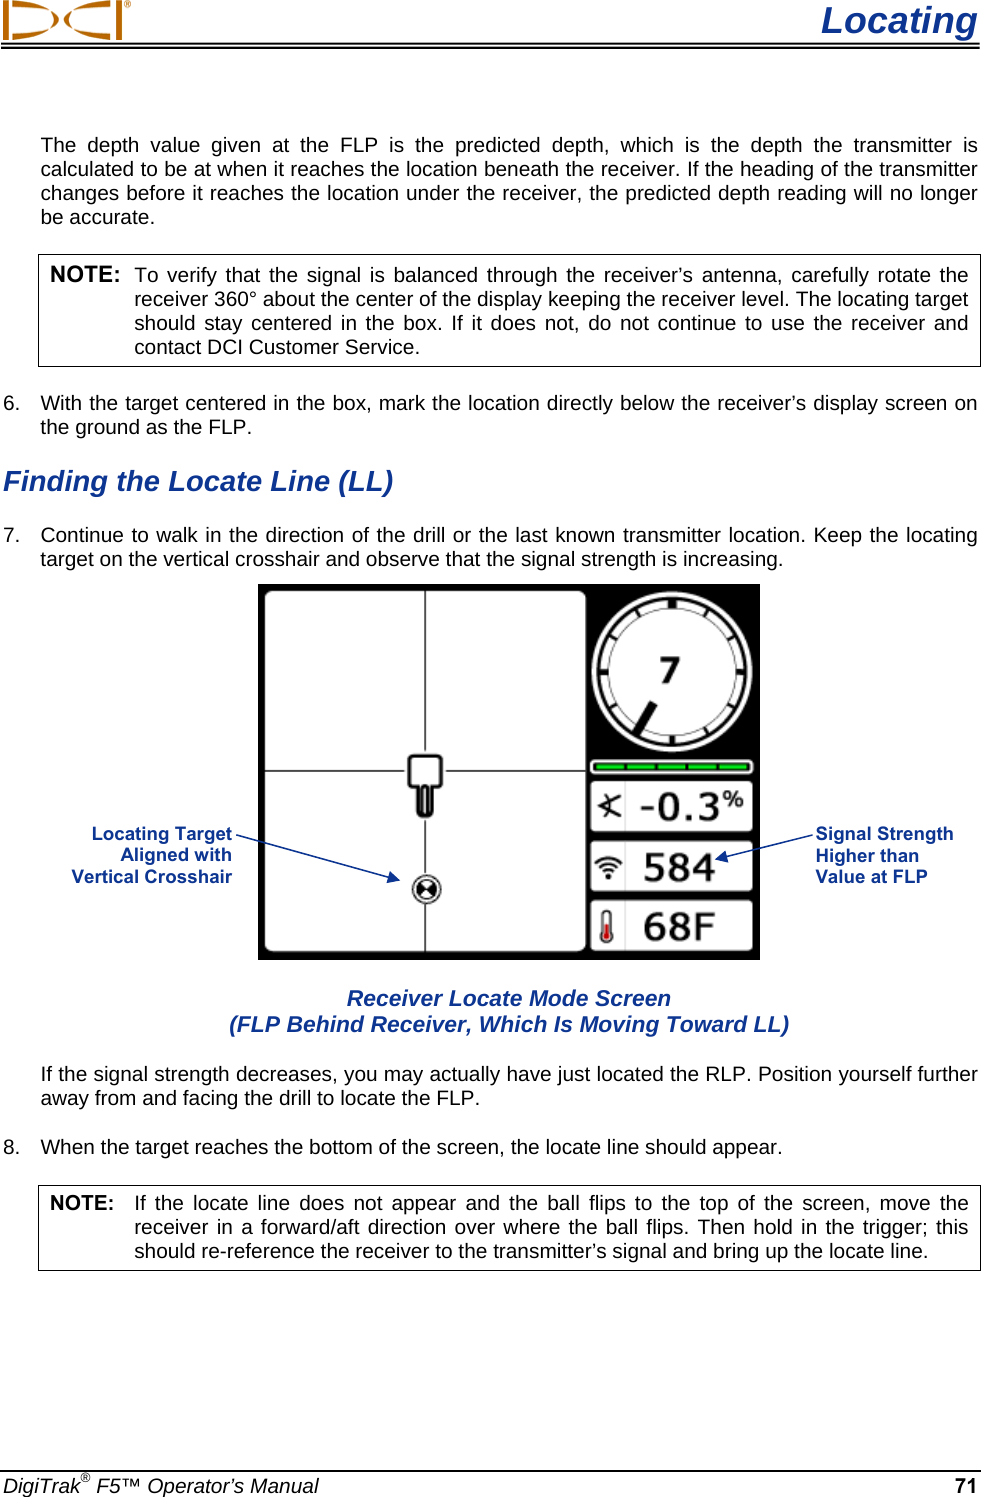  Locating DigiTrak® F5™ Operator’s Manual 71 The depth value given at the FLP is the predicted depth, which is the depth the transmitter is calculated to be at when it reaches the location beneath the receiver. If the heading of the transmitter changes before it reaches the location under the receiver, the predicted depth reading will no longer be accurate. NOTE: To verify that the signal is balanced through the receiver’s antenna, carefully rotate the receiver 360° about the center of the display keeping the receiver level. The locating target should stay centered in the box. If it does not, do not continue to use the receiver and contact DCI Customer Service. 6.  With the target centered in the box, mark the location directly below the receiver’s display screen on the ground as the FLP.  Finding the Locate Line (LL) 7.  Continue to walk in the direction of the drill or the last known transmitter location. Keep the locating target on the vertical crosshair and observe that the signal strength is increasing.   Receiver Locate Mode Screen (FLP Behind Receiver, Which Is Moving Toward LL) If the signal strength decreases, you may actually have just located the RLP. Position yourself further away from and facing the drill to locate the FLP. 8.  When the target reaches the bottom of the screen, the locate line should appear.  NOTE:  If the locate line does not appear and the ball flips to the top of the screen, move the receiver in a forward/aft direction over where the ball flips. Then hold in the trigger; this should re-reference the receiver to the transmitter’s signal and bring up the locate line.  Signal Strength Higher than Value at FLP Locating Target  Aligned with  Vertical Crosshair  